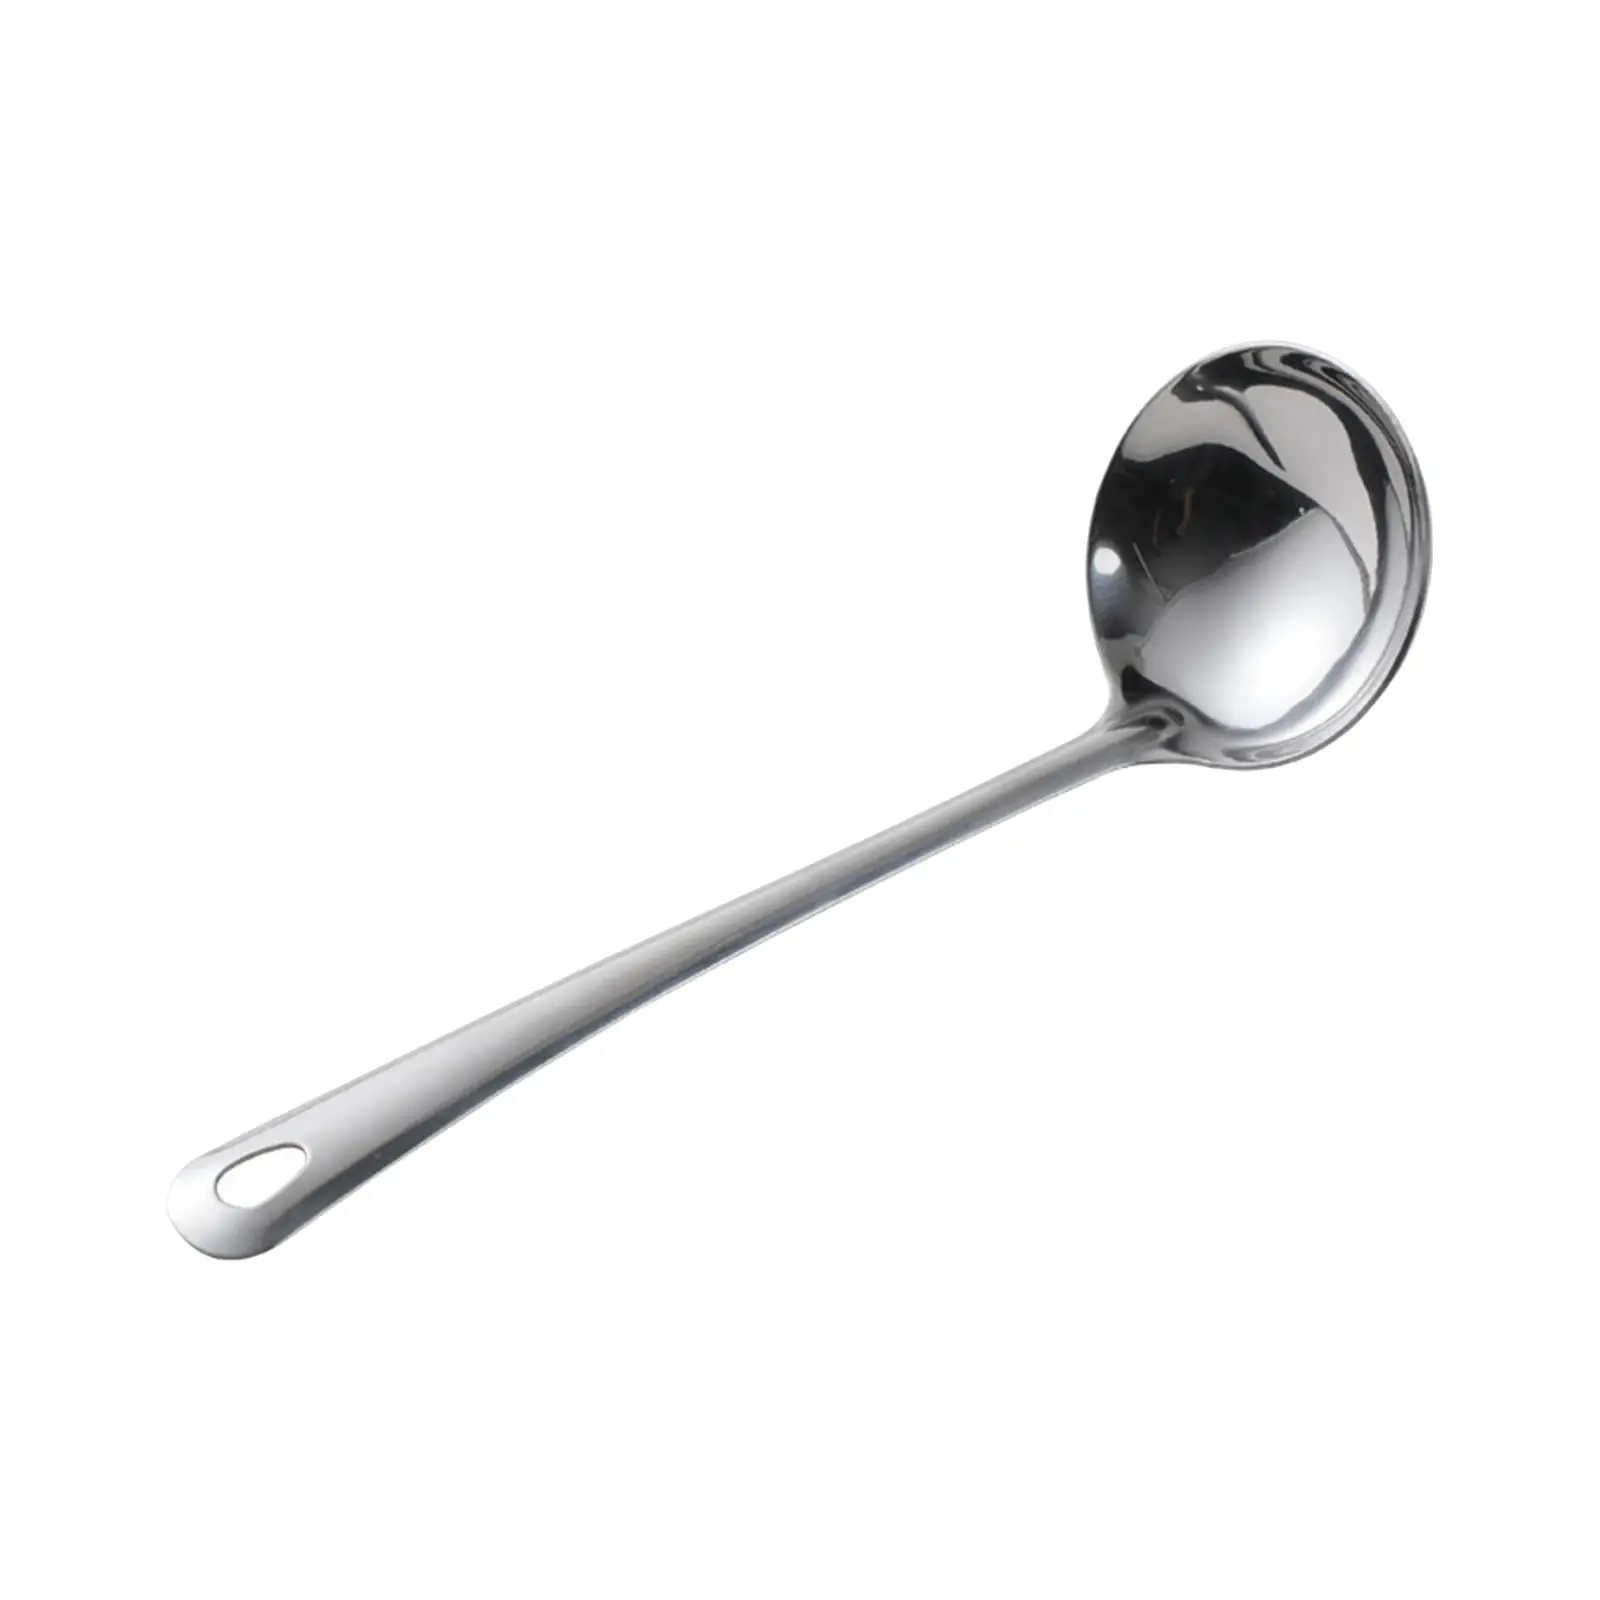 https://ae01.alicdn.com/kf/Sbf312b5a634e4aa487bdb371d8278fee2/Soup-Ladle-Spoon-Heat-Resistance-Stainless-Steel-Long-Handle-Comfortable-Grip-Cooking-Ladle-for-Gravy-Home.jpg